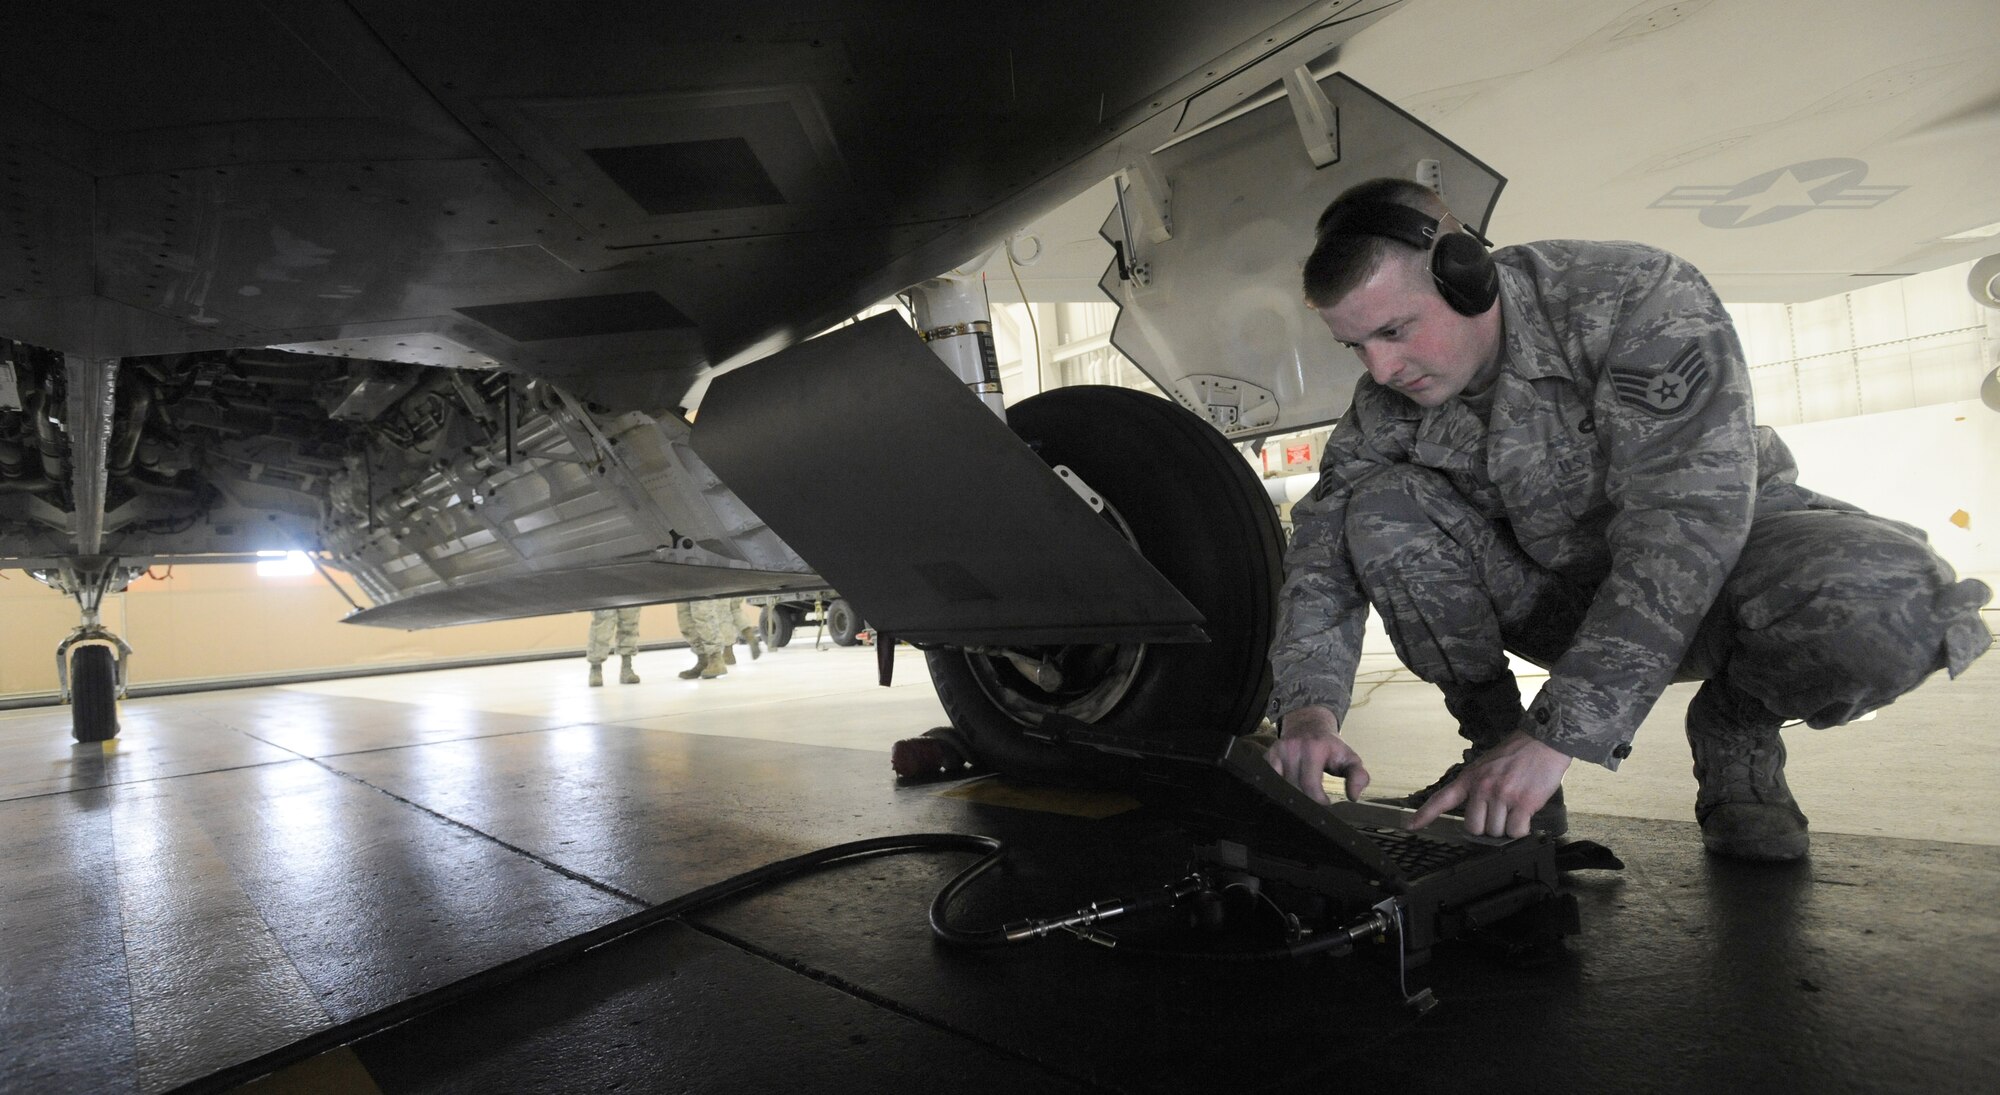 ELMENDORF AIR FORCE BASE, Alaska -- Staff Sgt. Jason Leighton, 90th Aircraft Maintenance Unit, runs diagnostics on a F-22 during a load crew inspection March 11, 2009. Leighton is a 2009 Lt. Gen. Leo Marquez Award winner in the Munitions/Missile Technician Supervisor Category. The Marquez Award is one of the hightest honors for a maintainer at Air Force level. (U.S. Air Force photo/Senior Airman Matthew Owens)